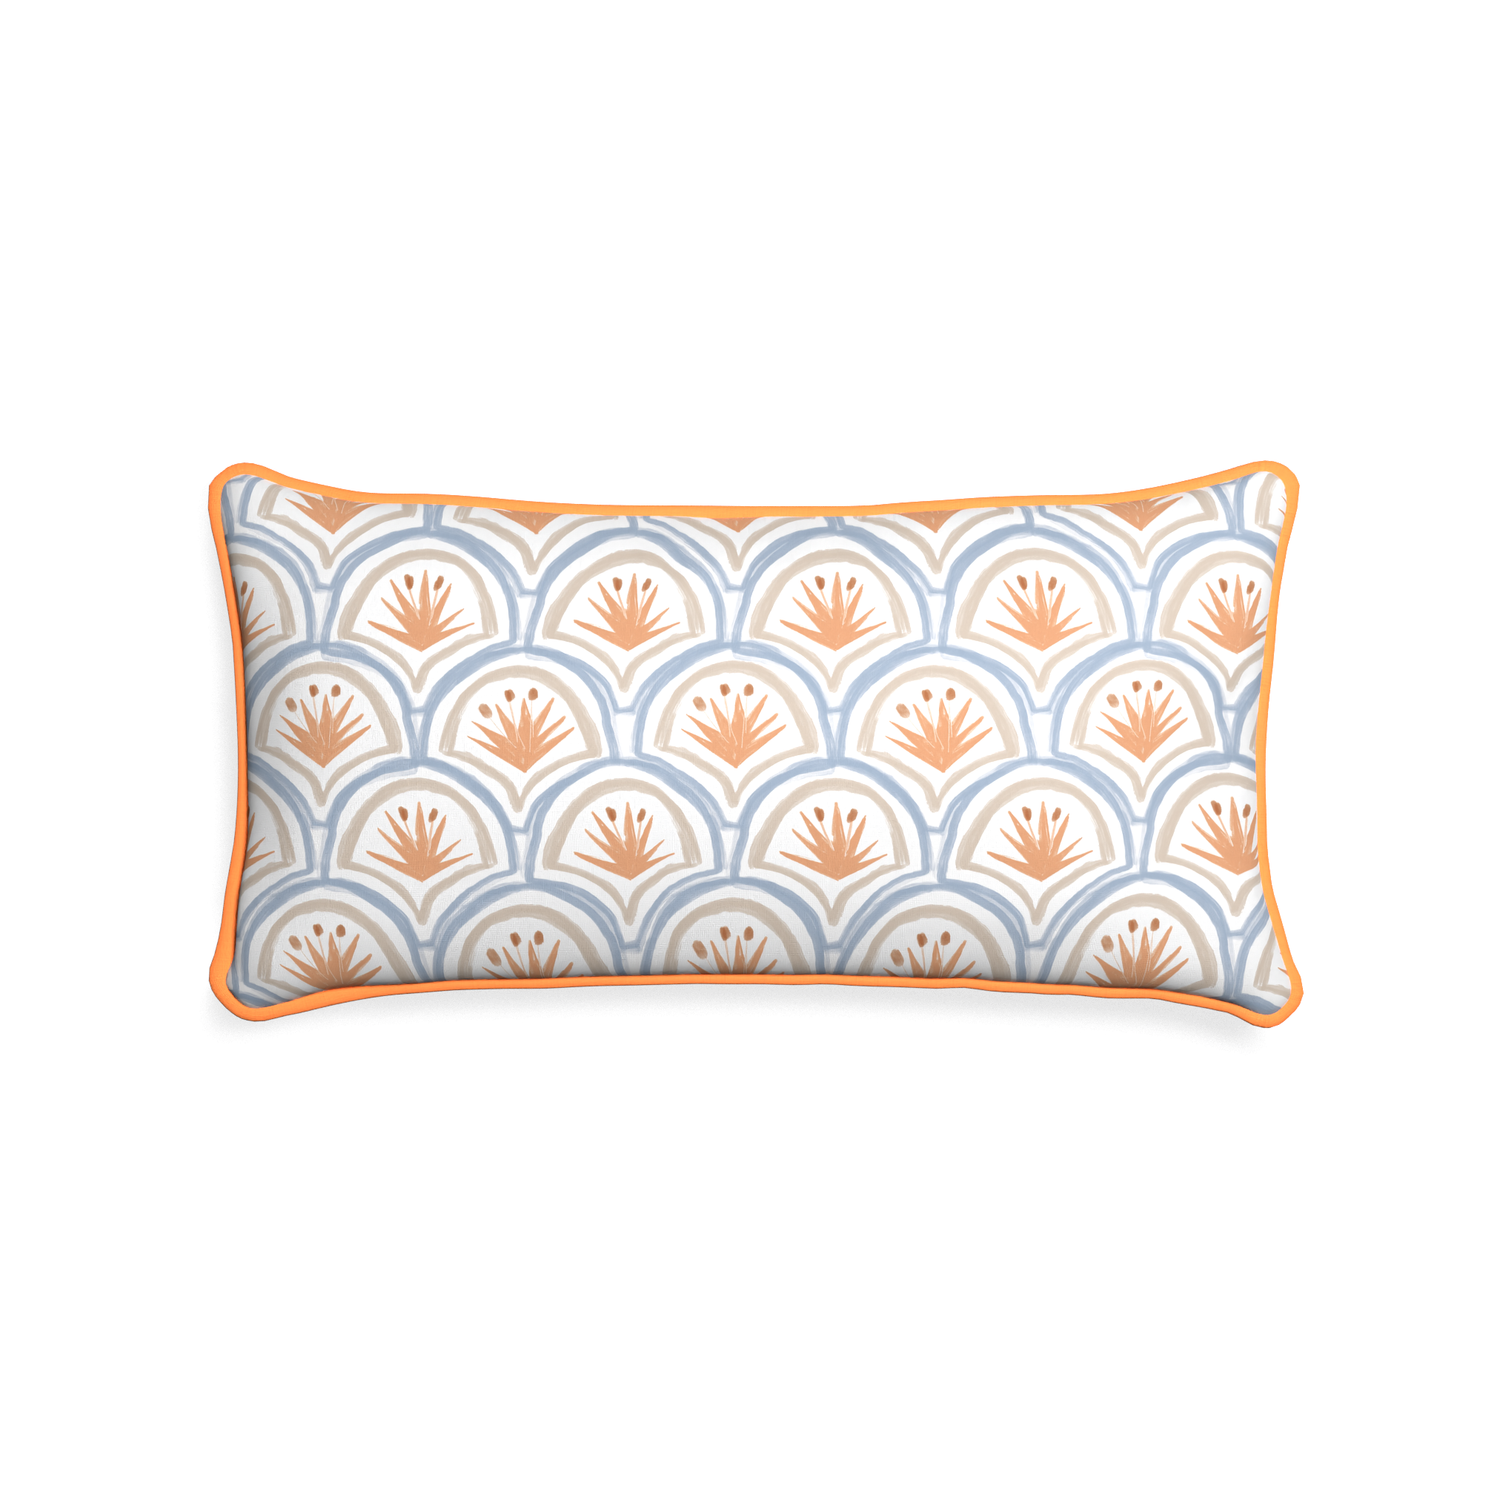 Midi-lumbar thatcher apricot custom art deco palm patternpillow with clementine piping on white background